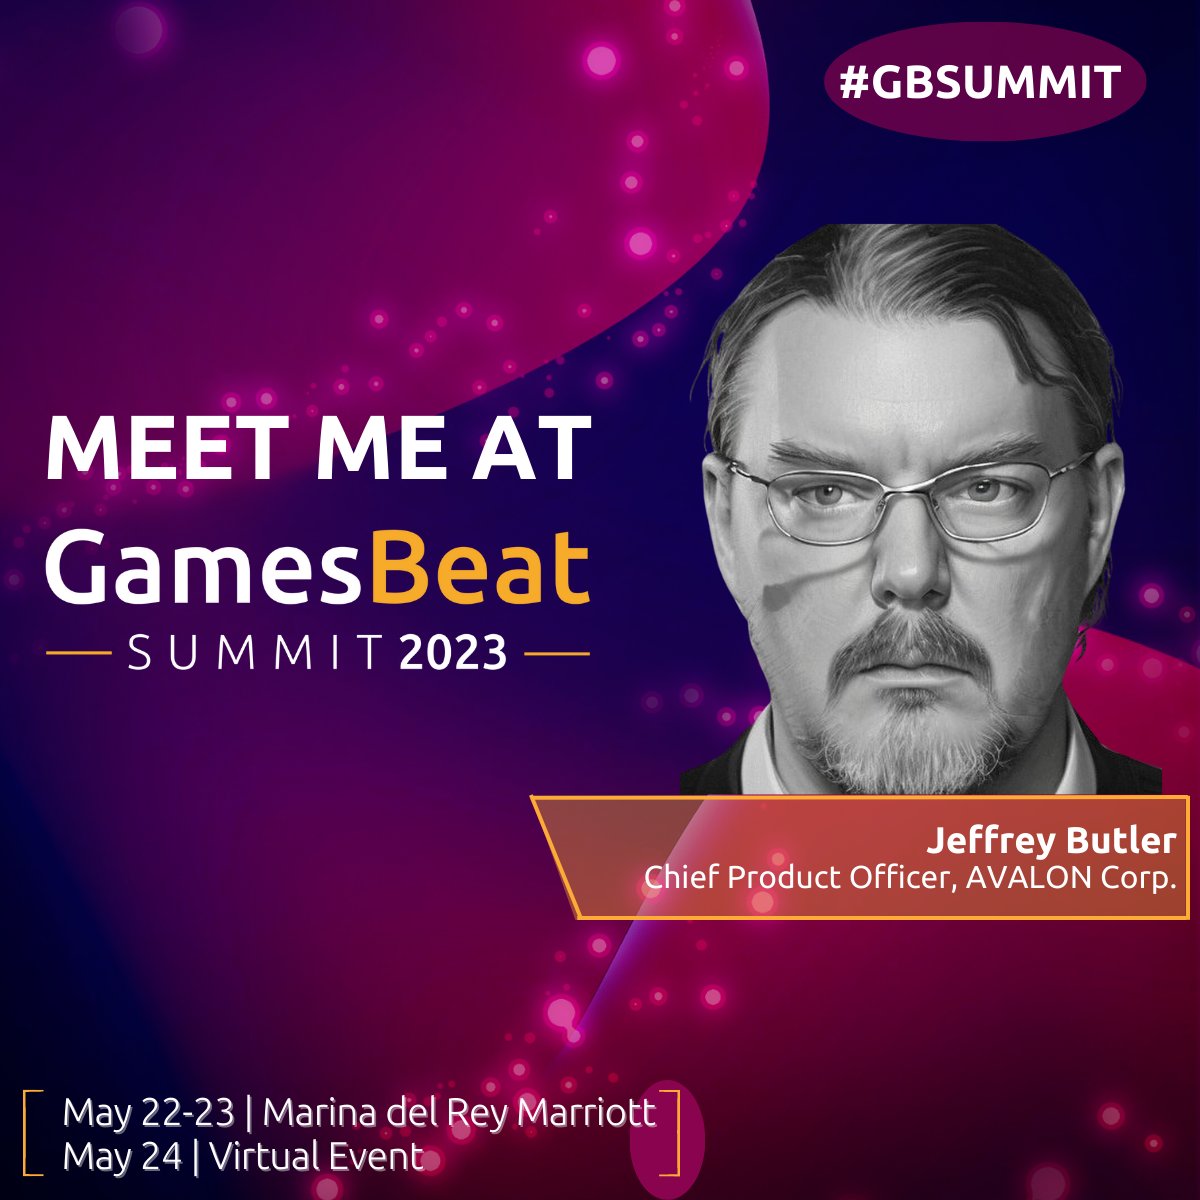 Heading to GamesBeat Summit next week! I'll be joining other industry leaders to talk about opportunities and challenges in Web3 games. If you’ll be there, come say hi and let’s chat about the future of gaming! #GBSummit